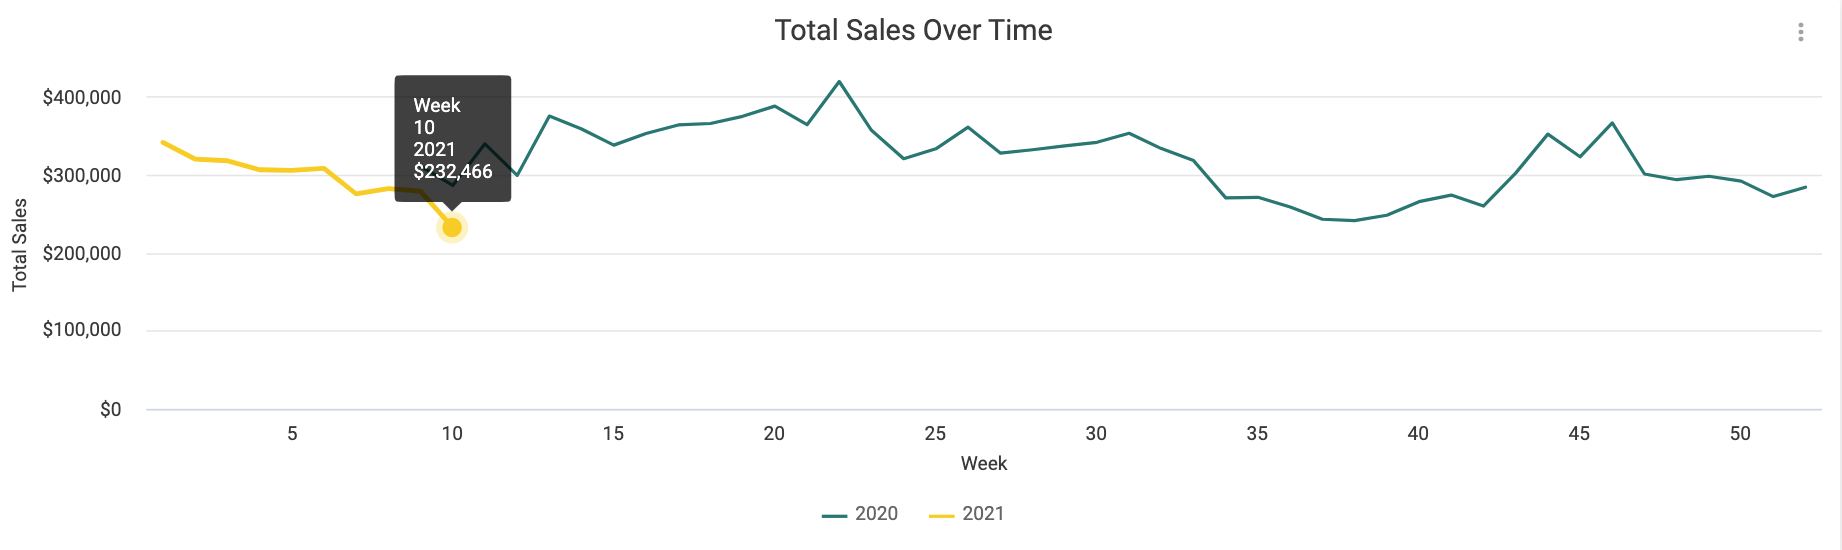 Total_Sales_Over_Time.png